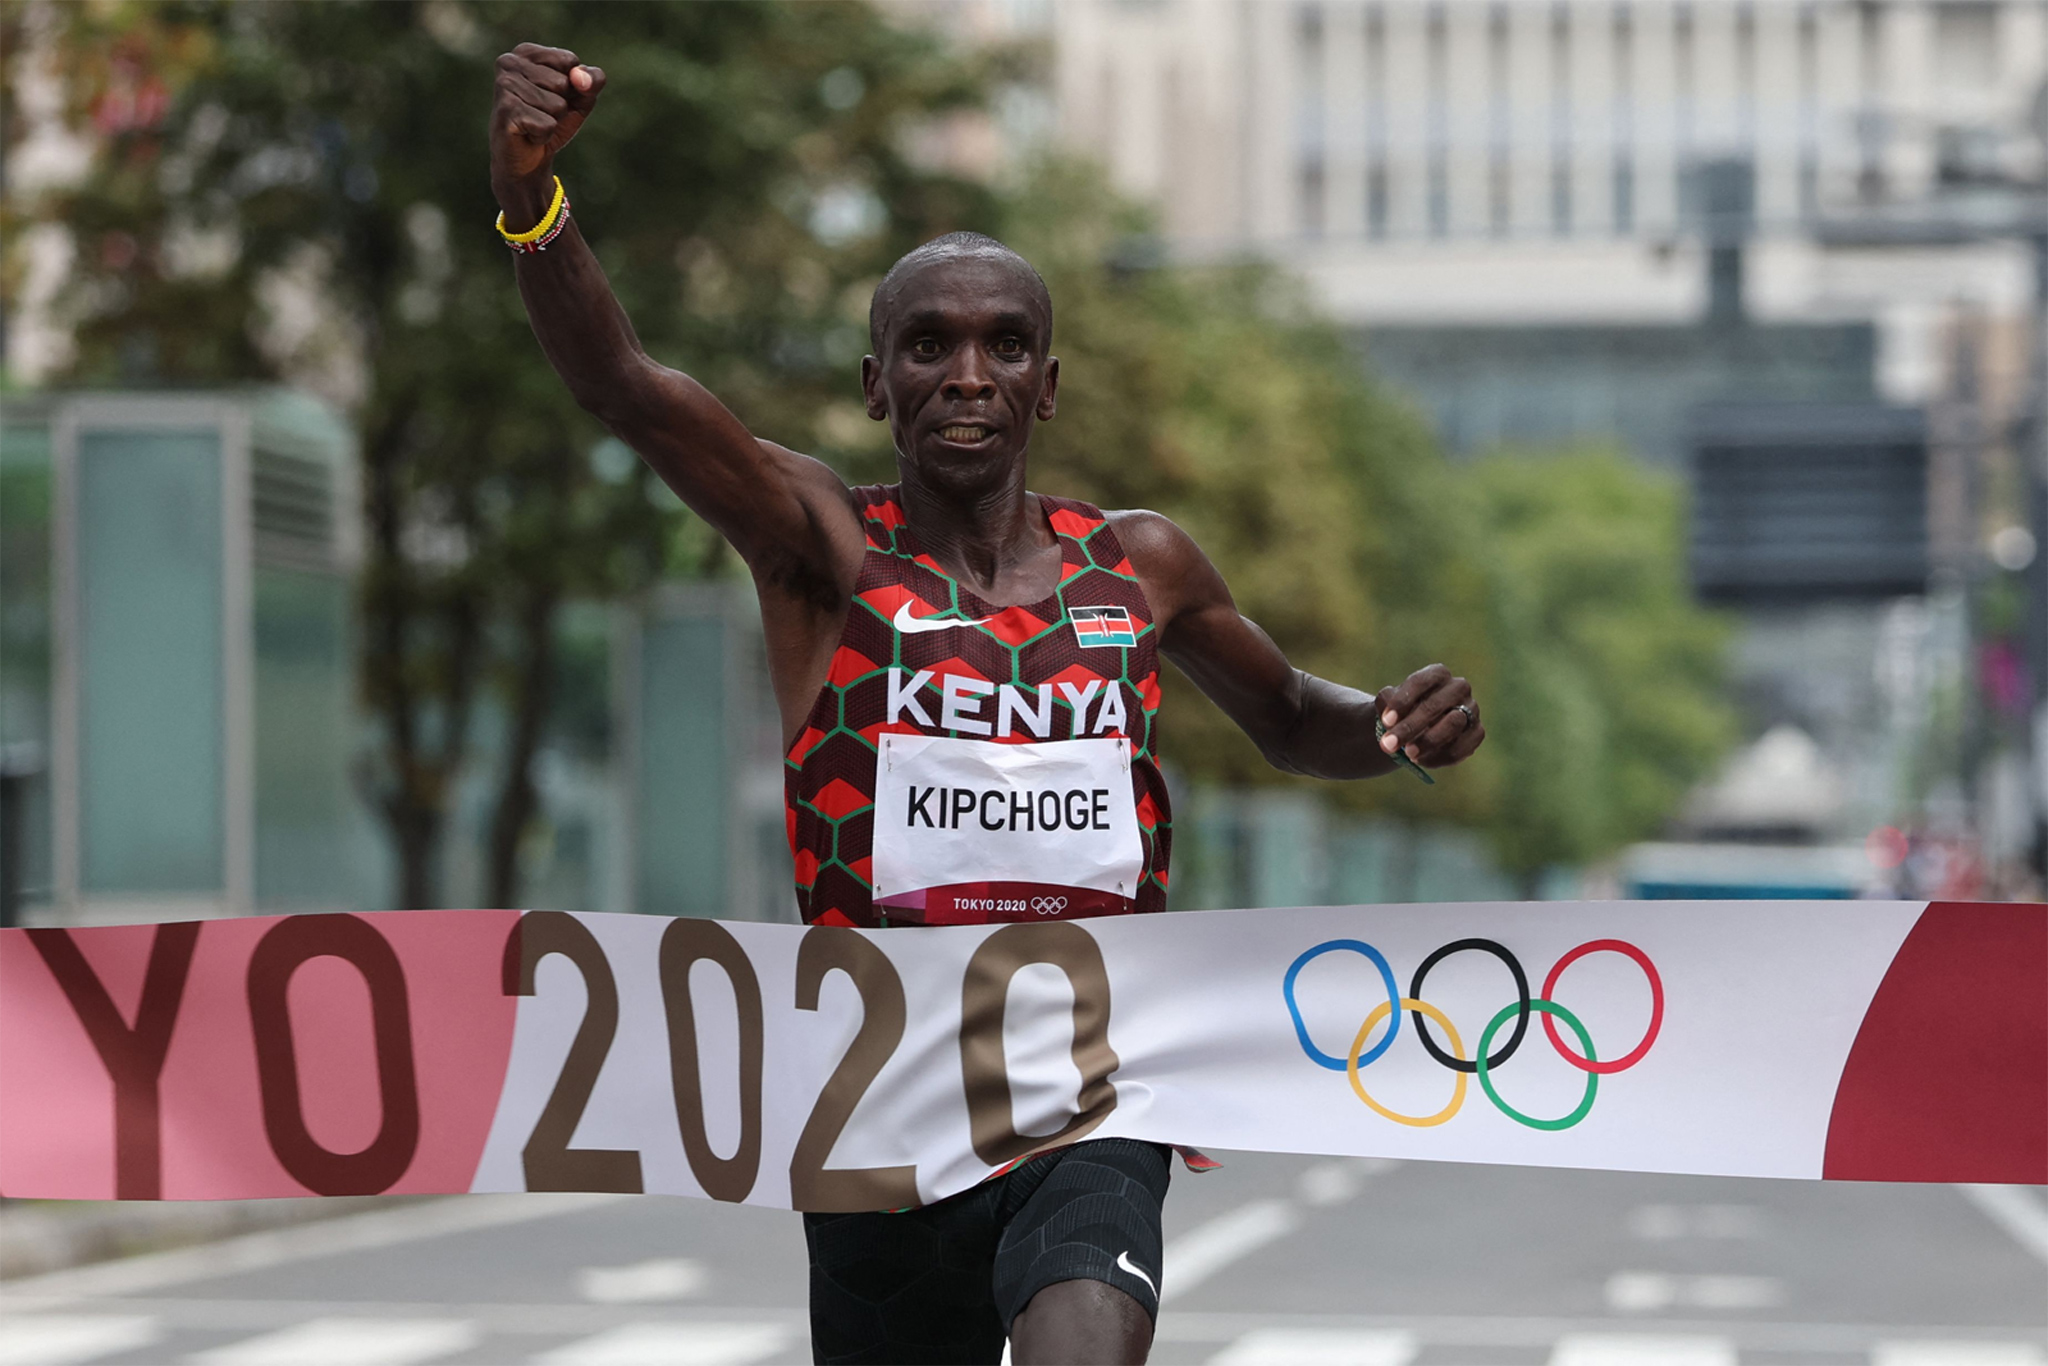 Eliud Kipchoge wins the marathon at the Tokyo Olympic Games (© AFP / Getty Images)